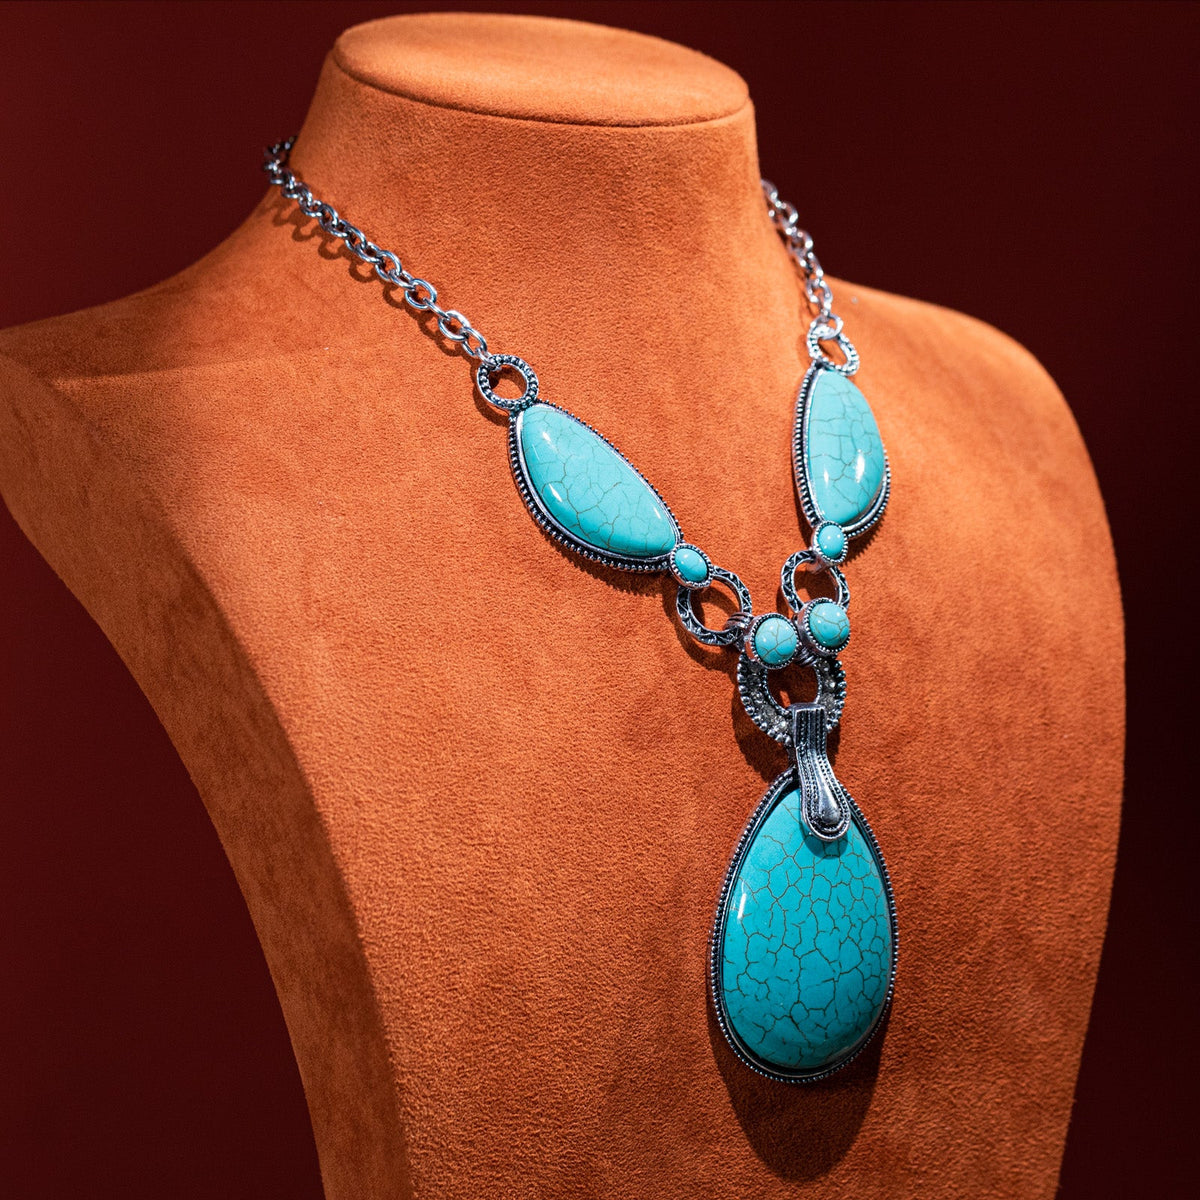 Rustic Couture Turquoise Stone Necklace - Montana West World